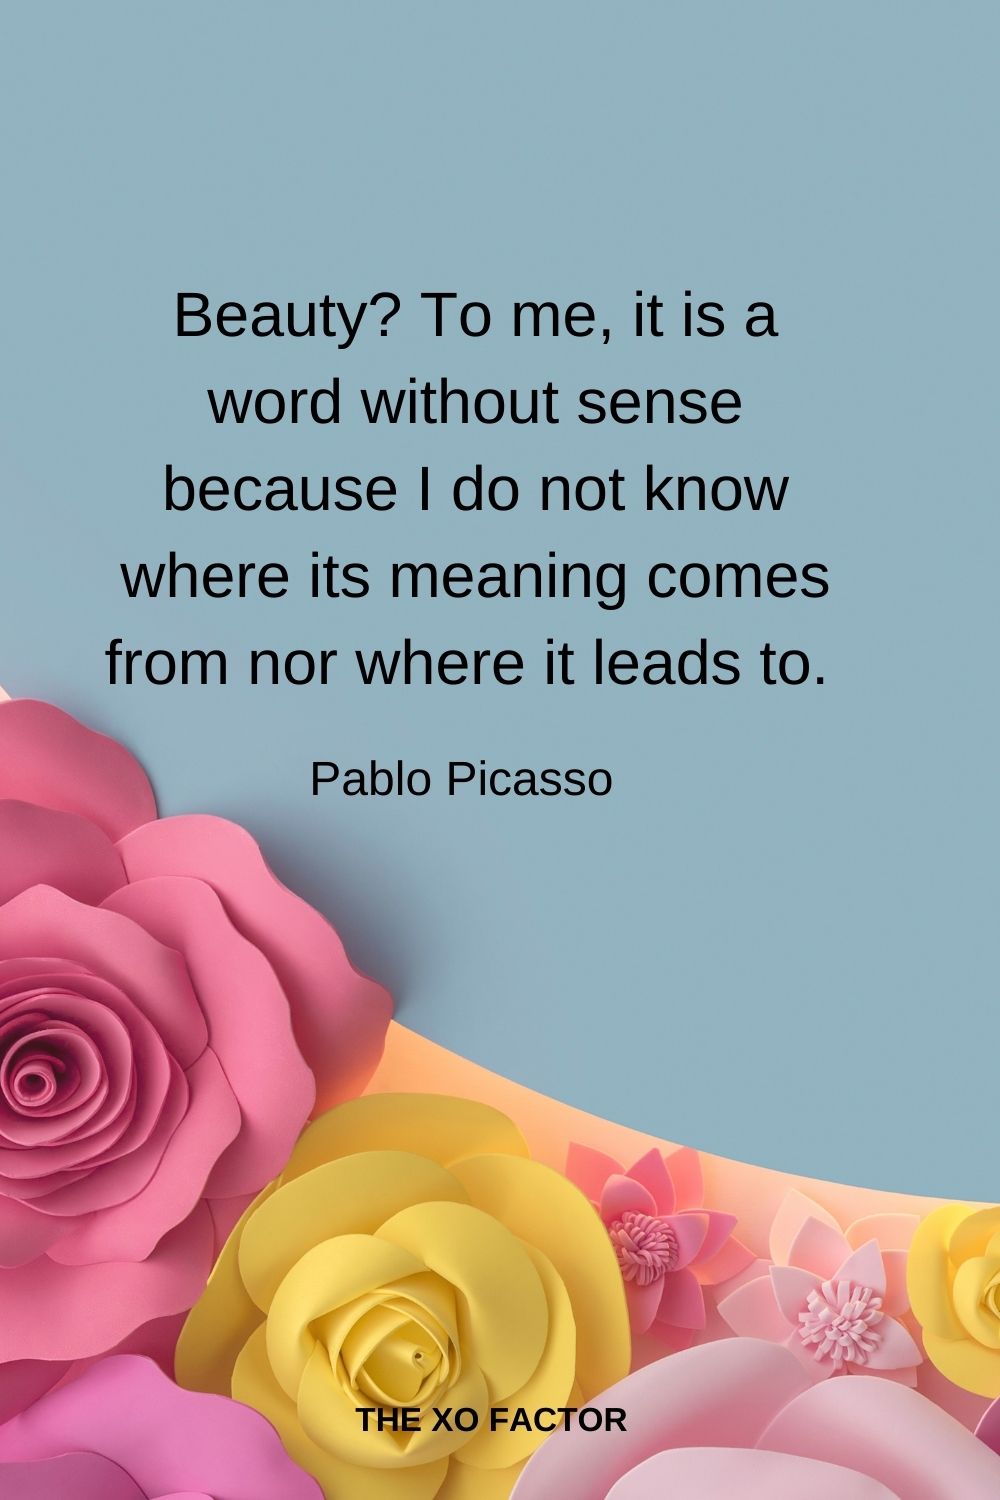 Beauty? To me it is a word without sense because I do not know where its meaning comes from nor where it leads to.  Pablo Picasso